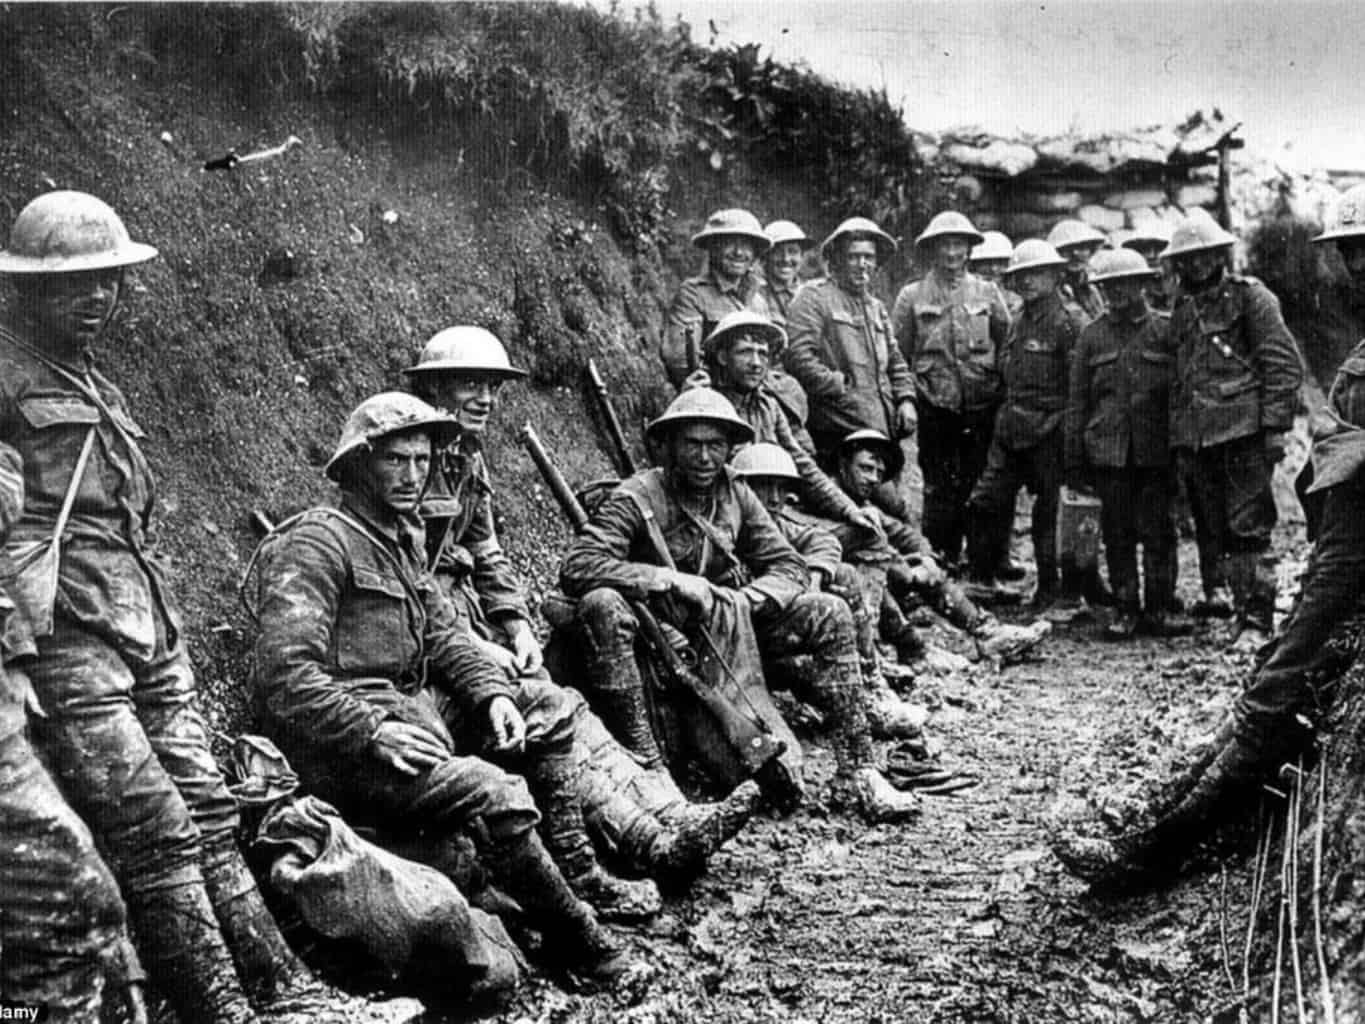 Soldiers in the trenches. Source: Top 10 Facts about the Trenches!